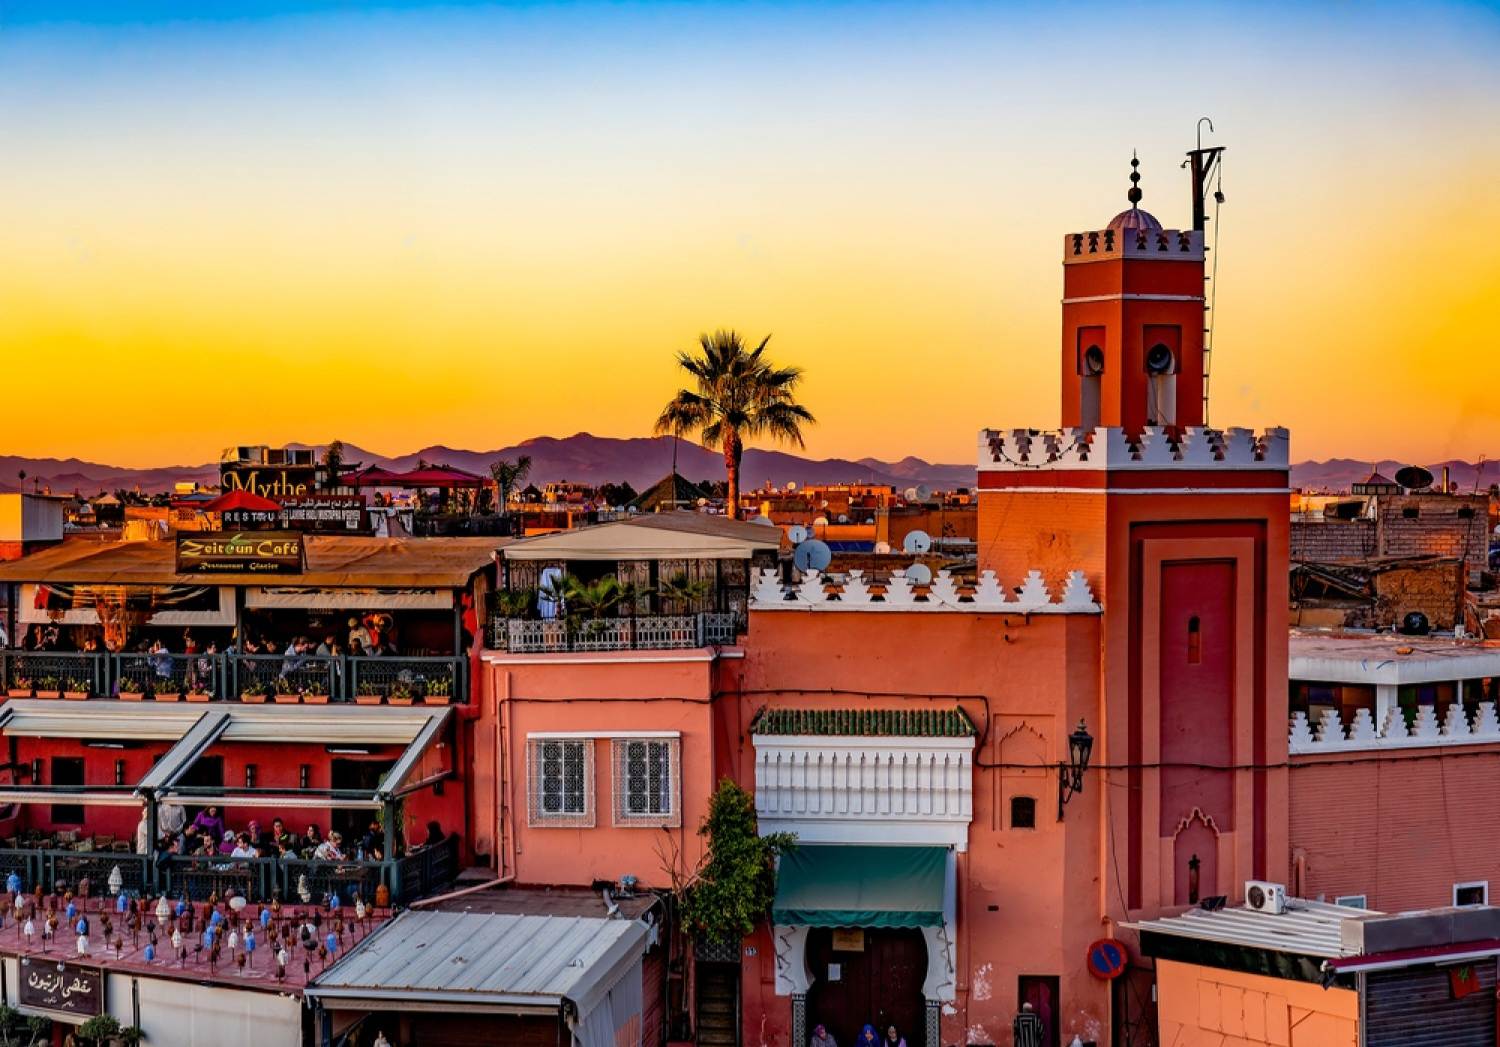 Day 14: Guided tour to Marrakech